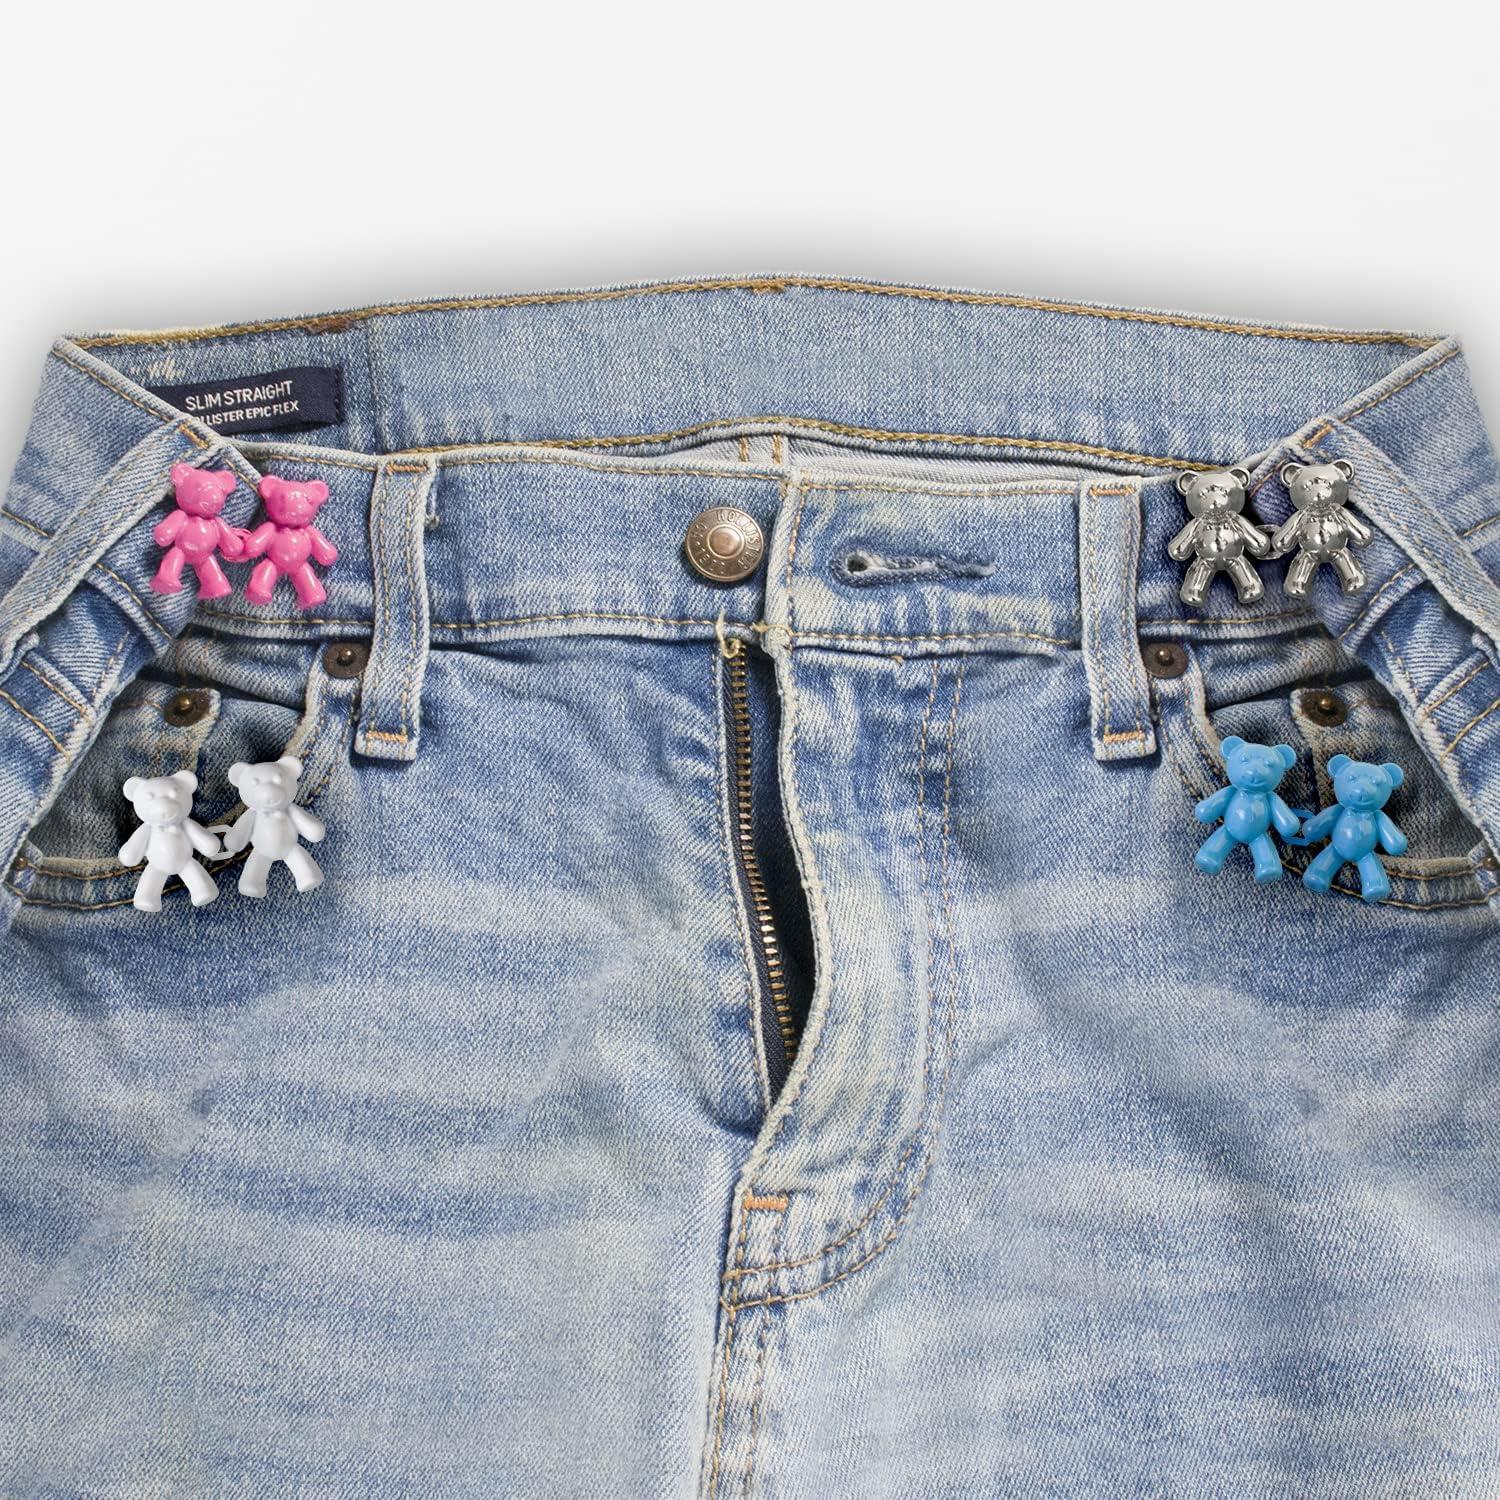  RichLuck Jeans Button, Adjustable Jean Button Pin